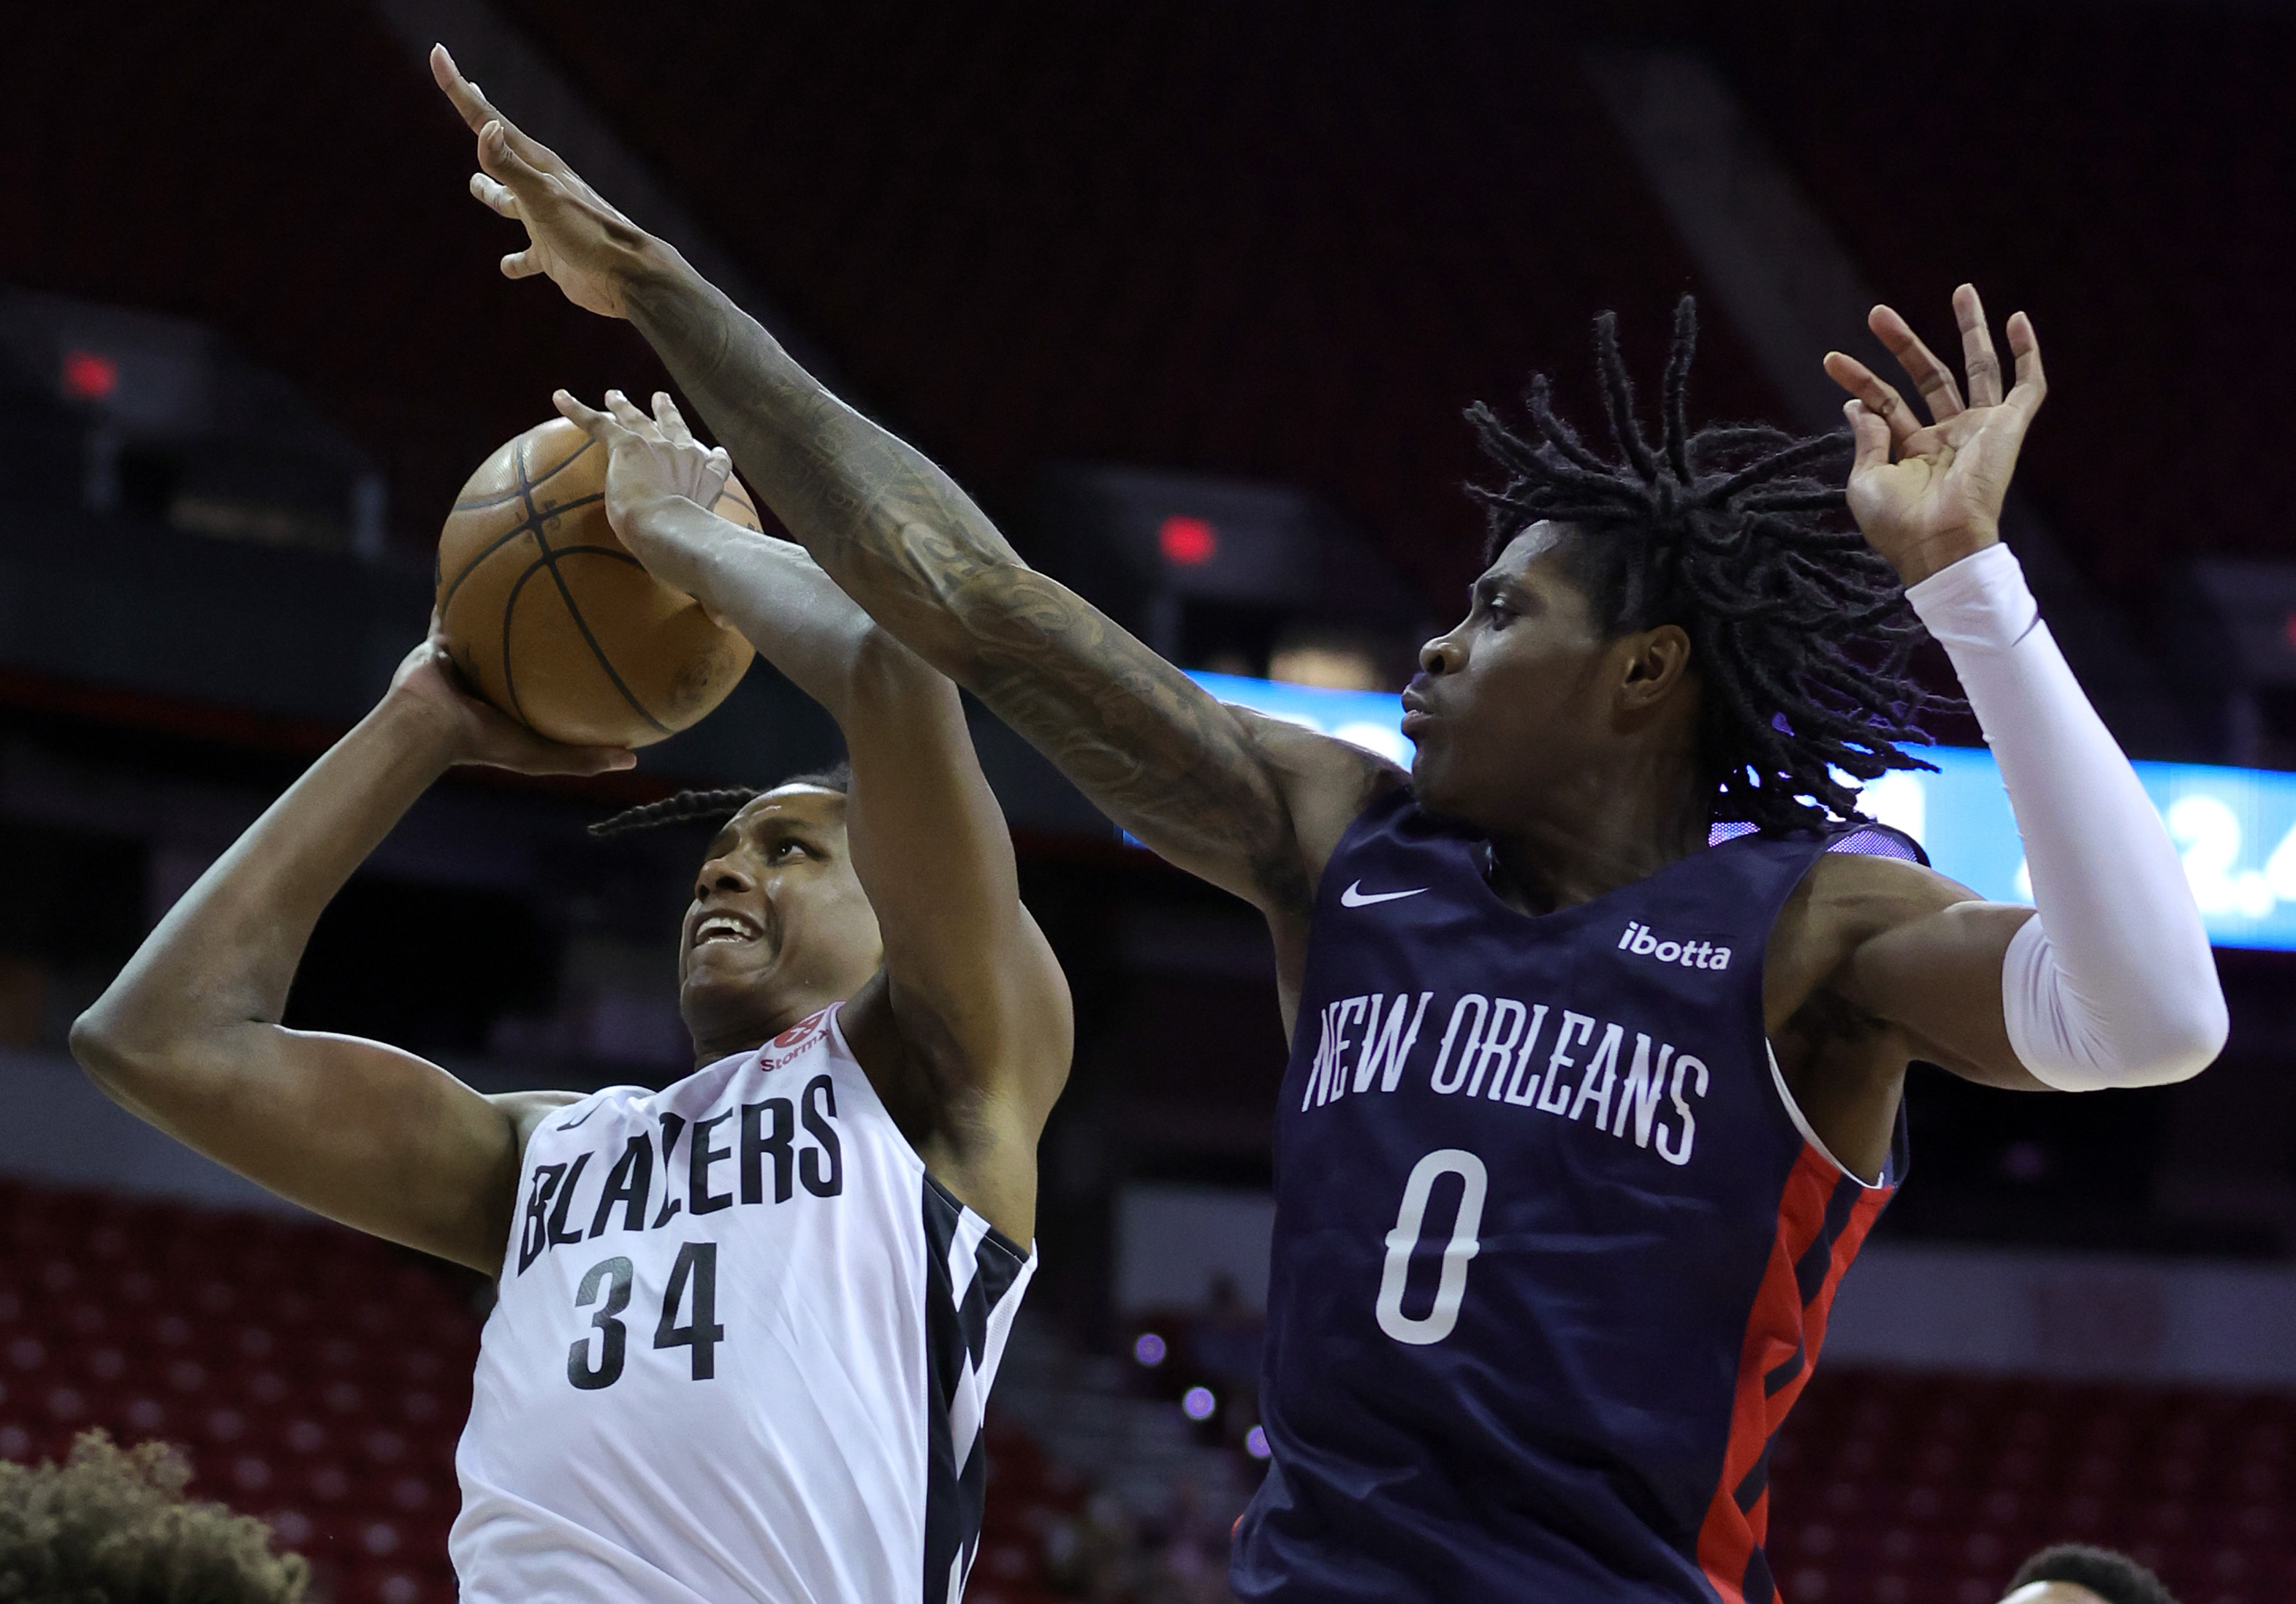 Ibotta renews team jersey sponsorship with New Orleans Pelicans